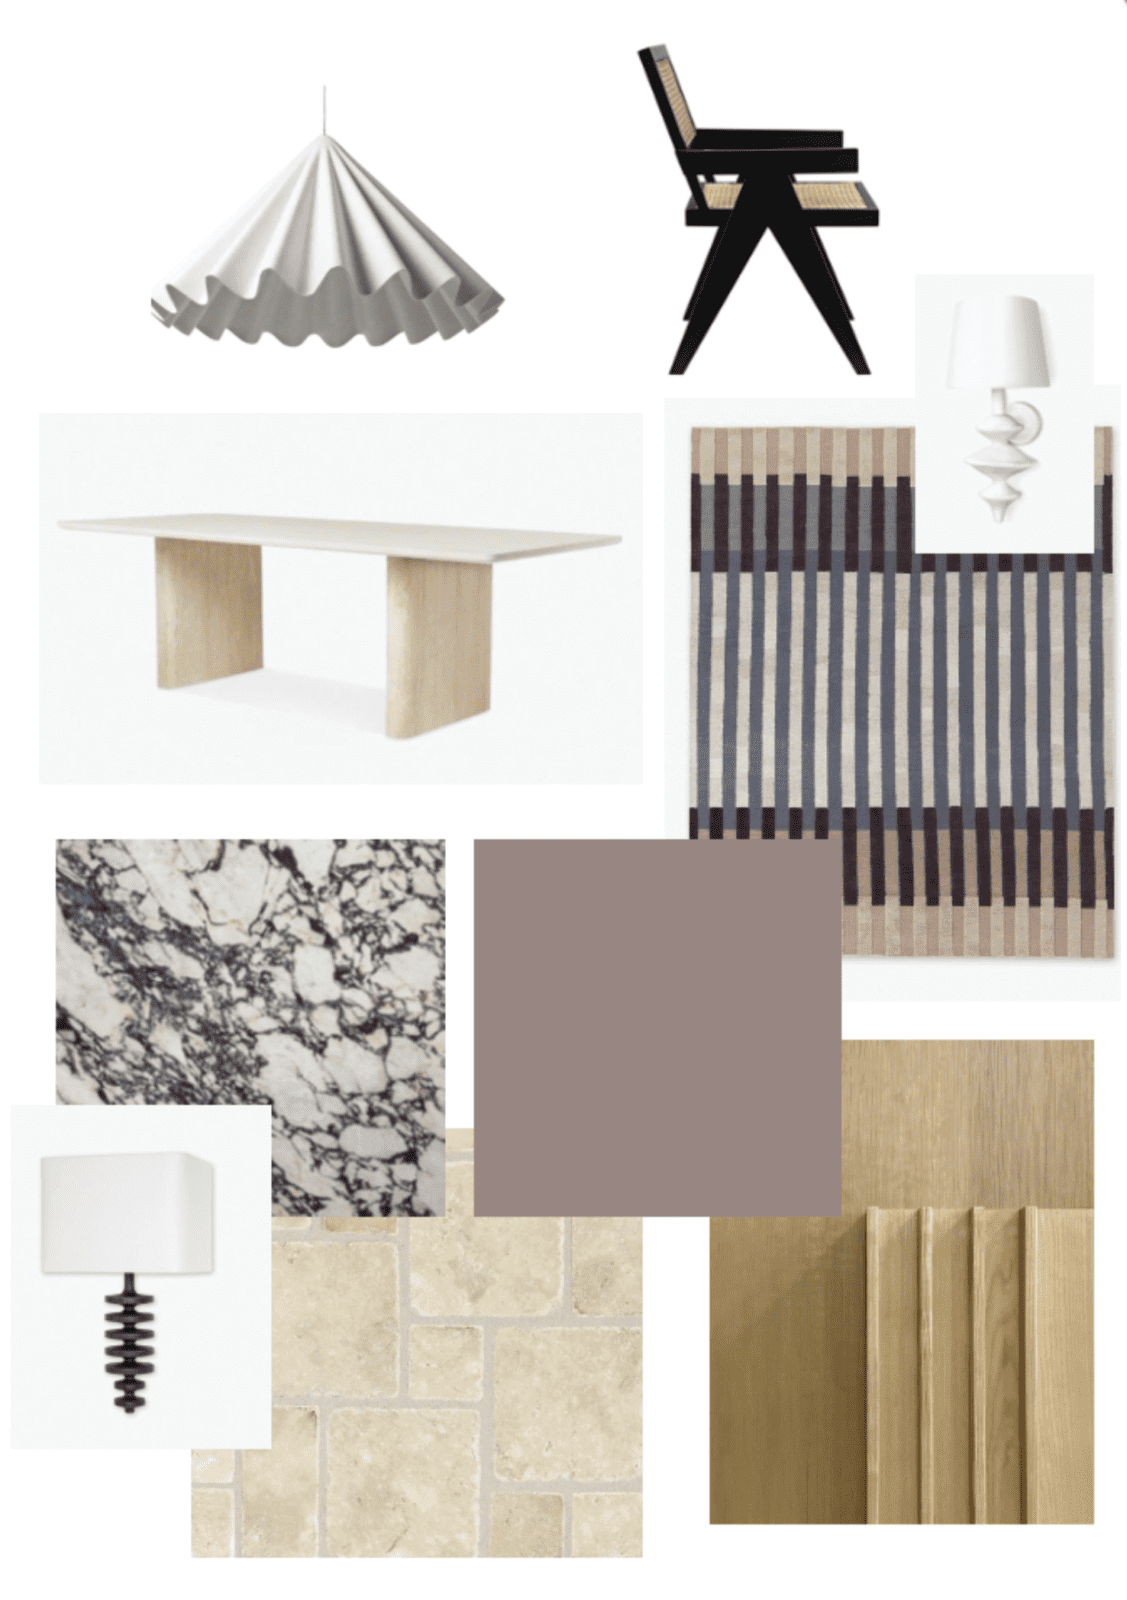 A Comprehensive List of the Materials We're Using in Our Kitchen Remodel